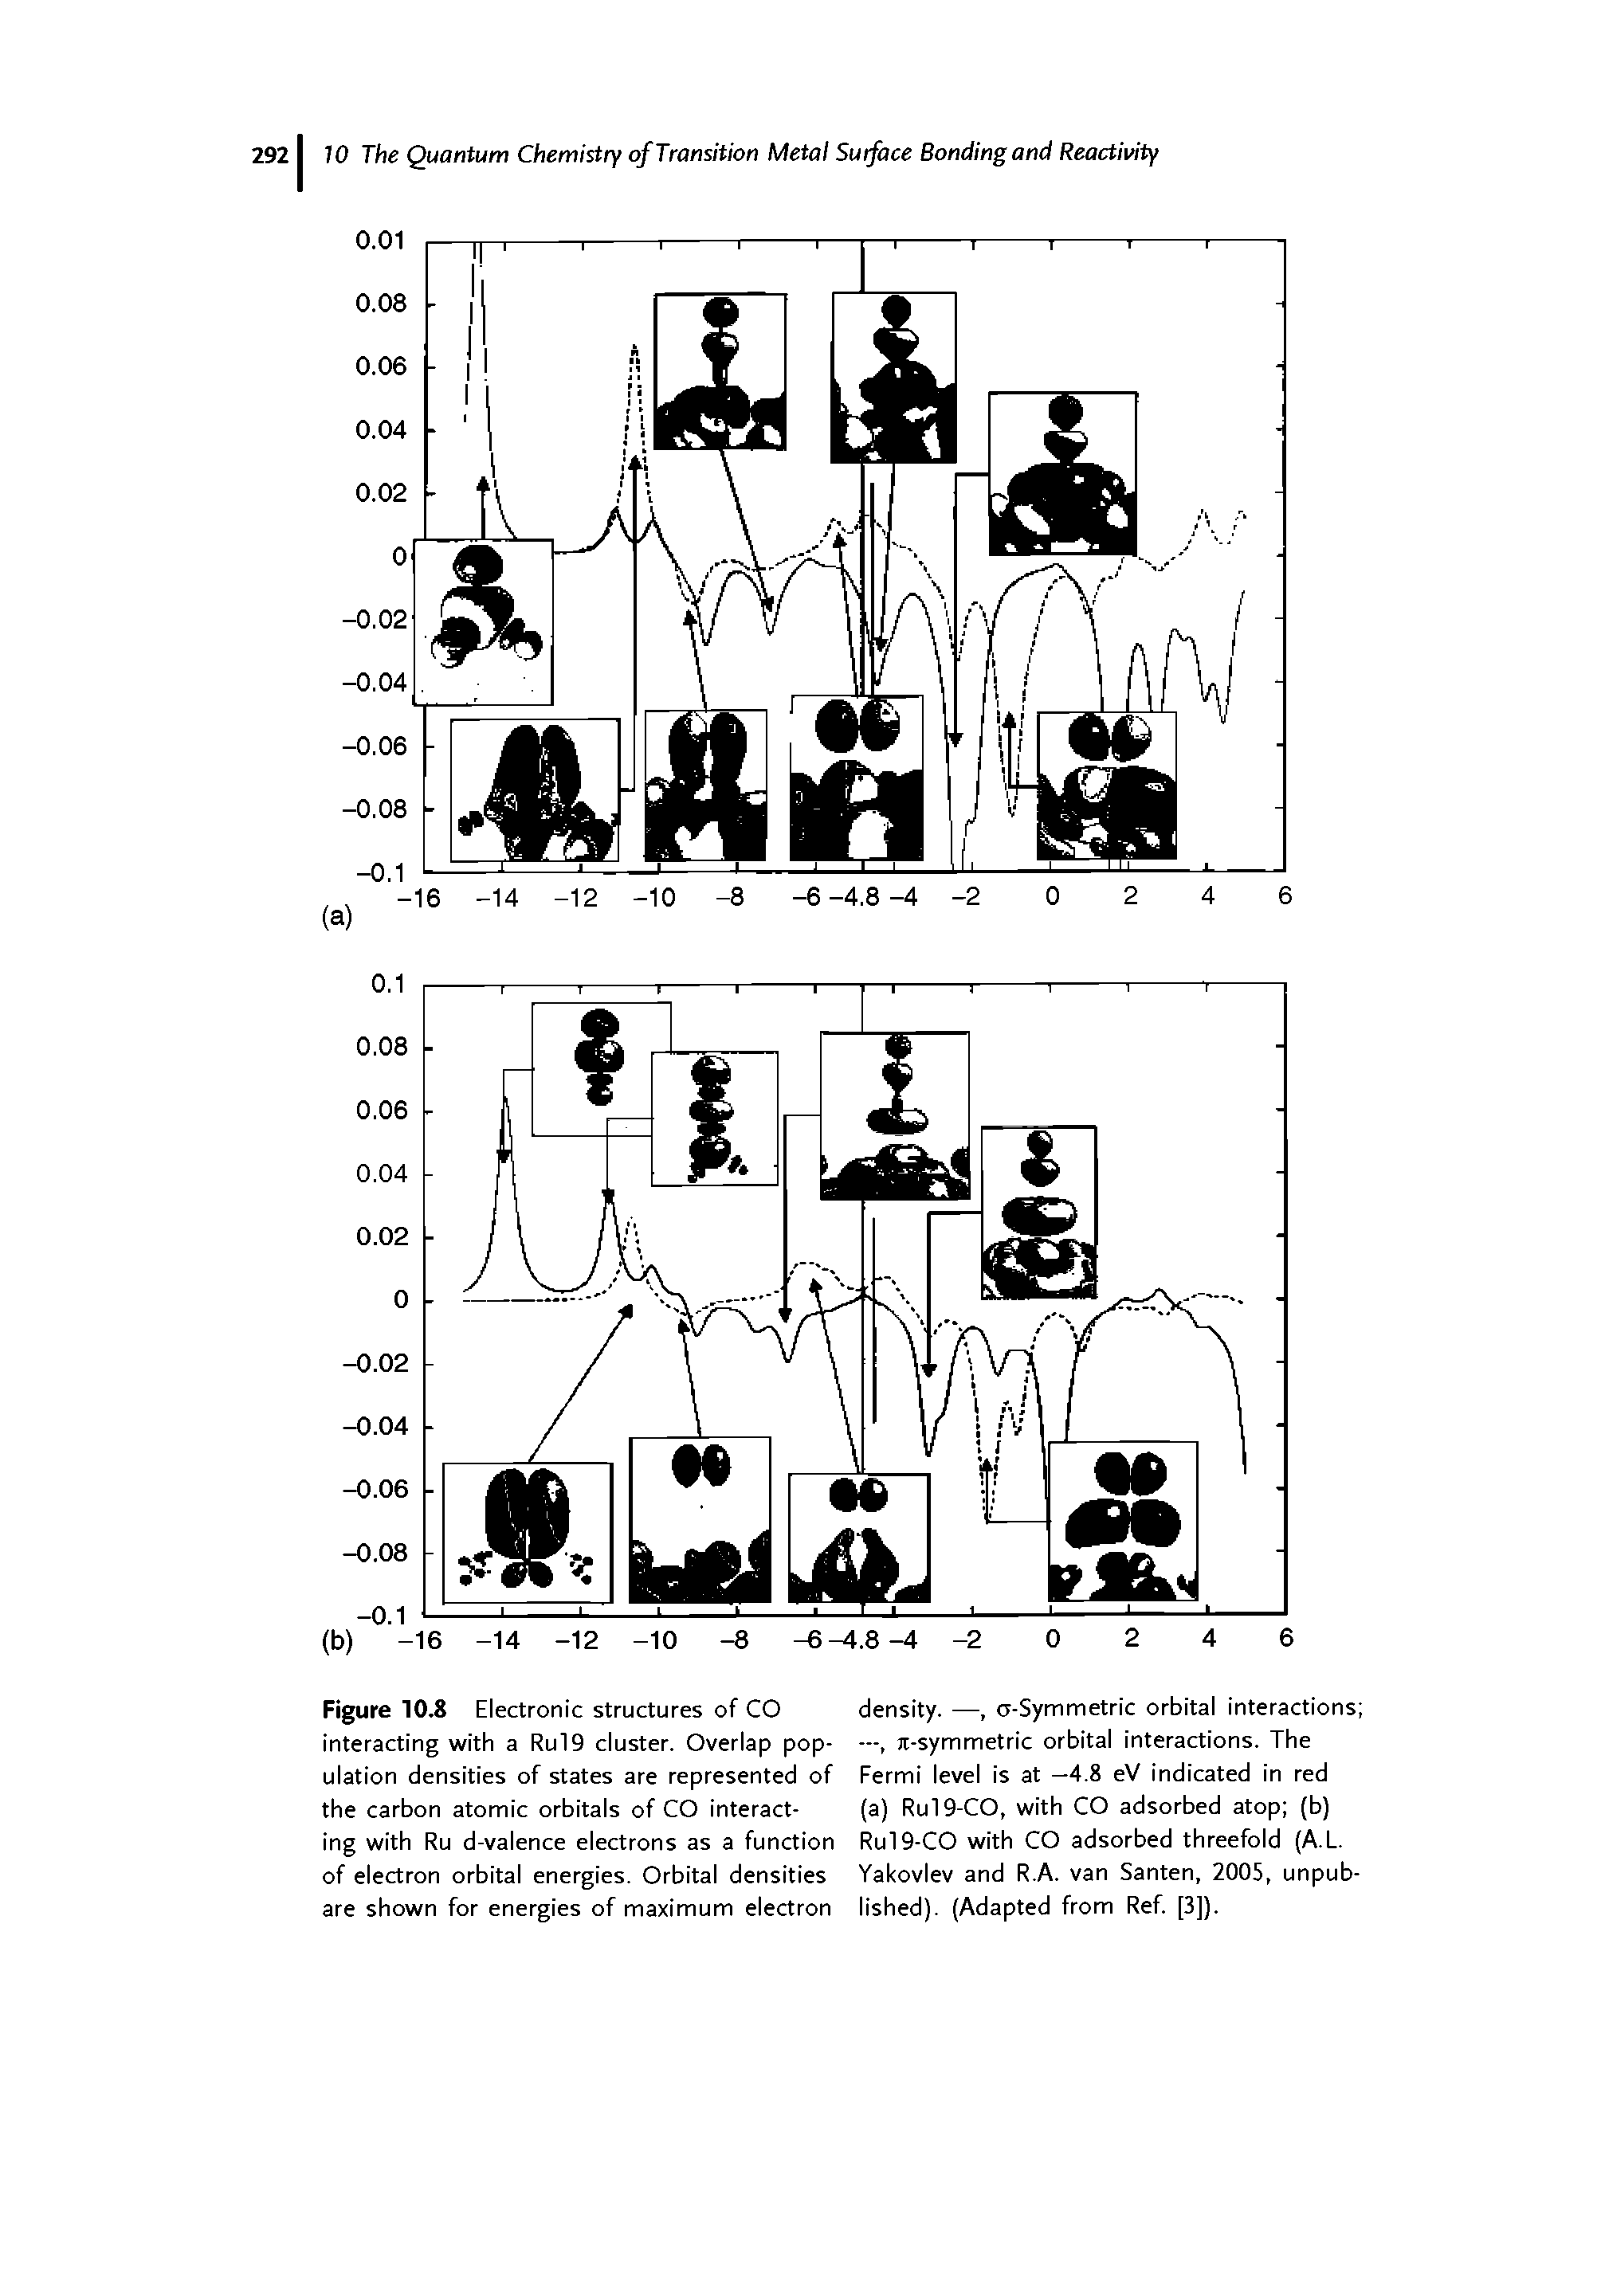 Figure 10.8 Electronic structures of CO interacting with a Rul9 cluster. Overlap population densities of states are represented of the carbon atomic orbitals of CO interacting with Ru d-valence electrons as a function of electron orbital energies. Orbital densities are shown for energies of maximum electron...